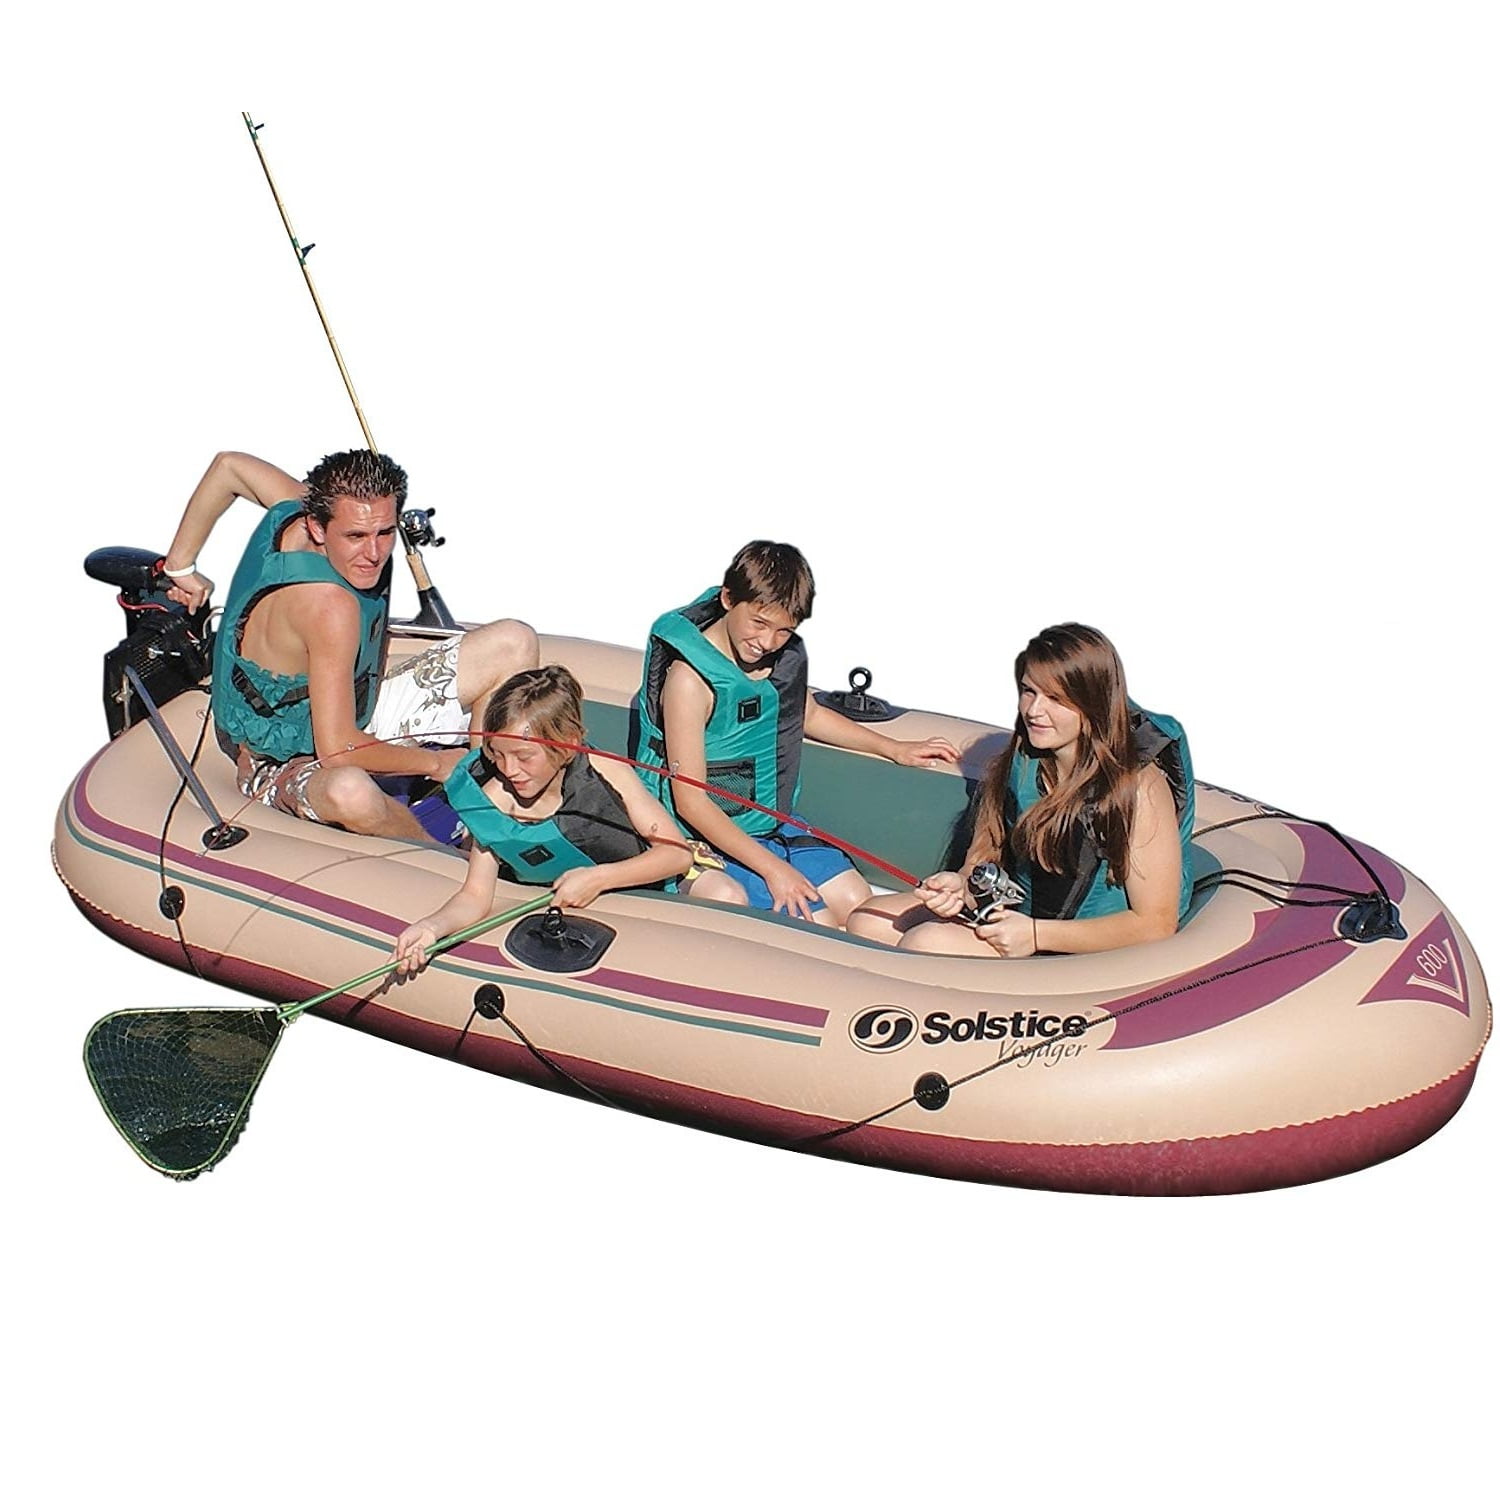 Oars Inflatable Boat